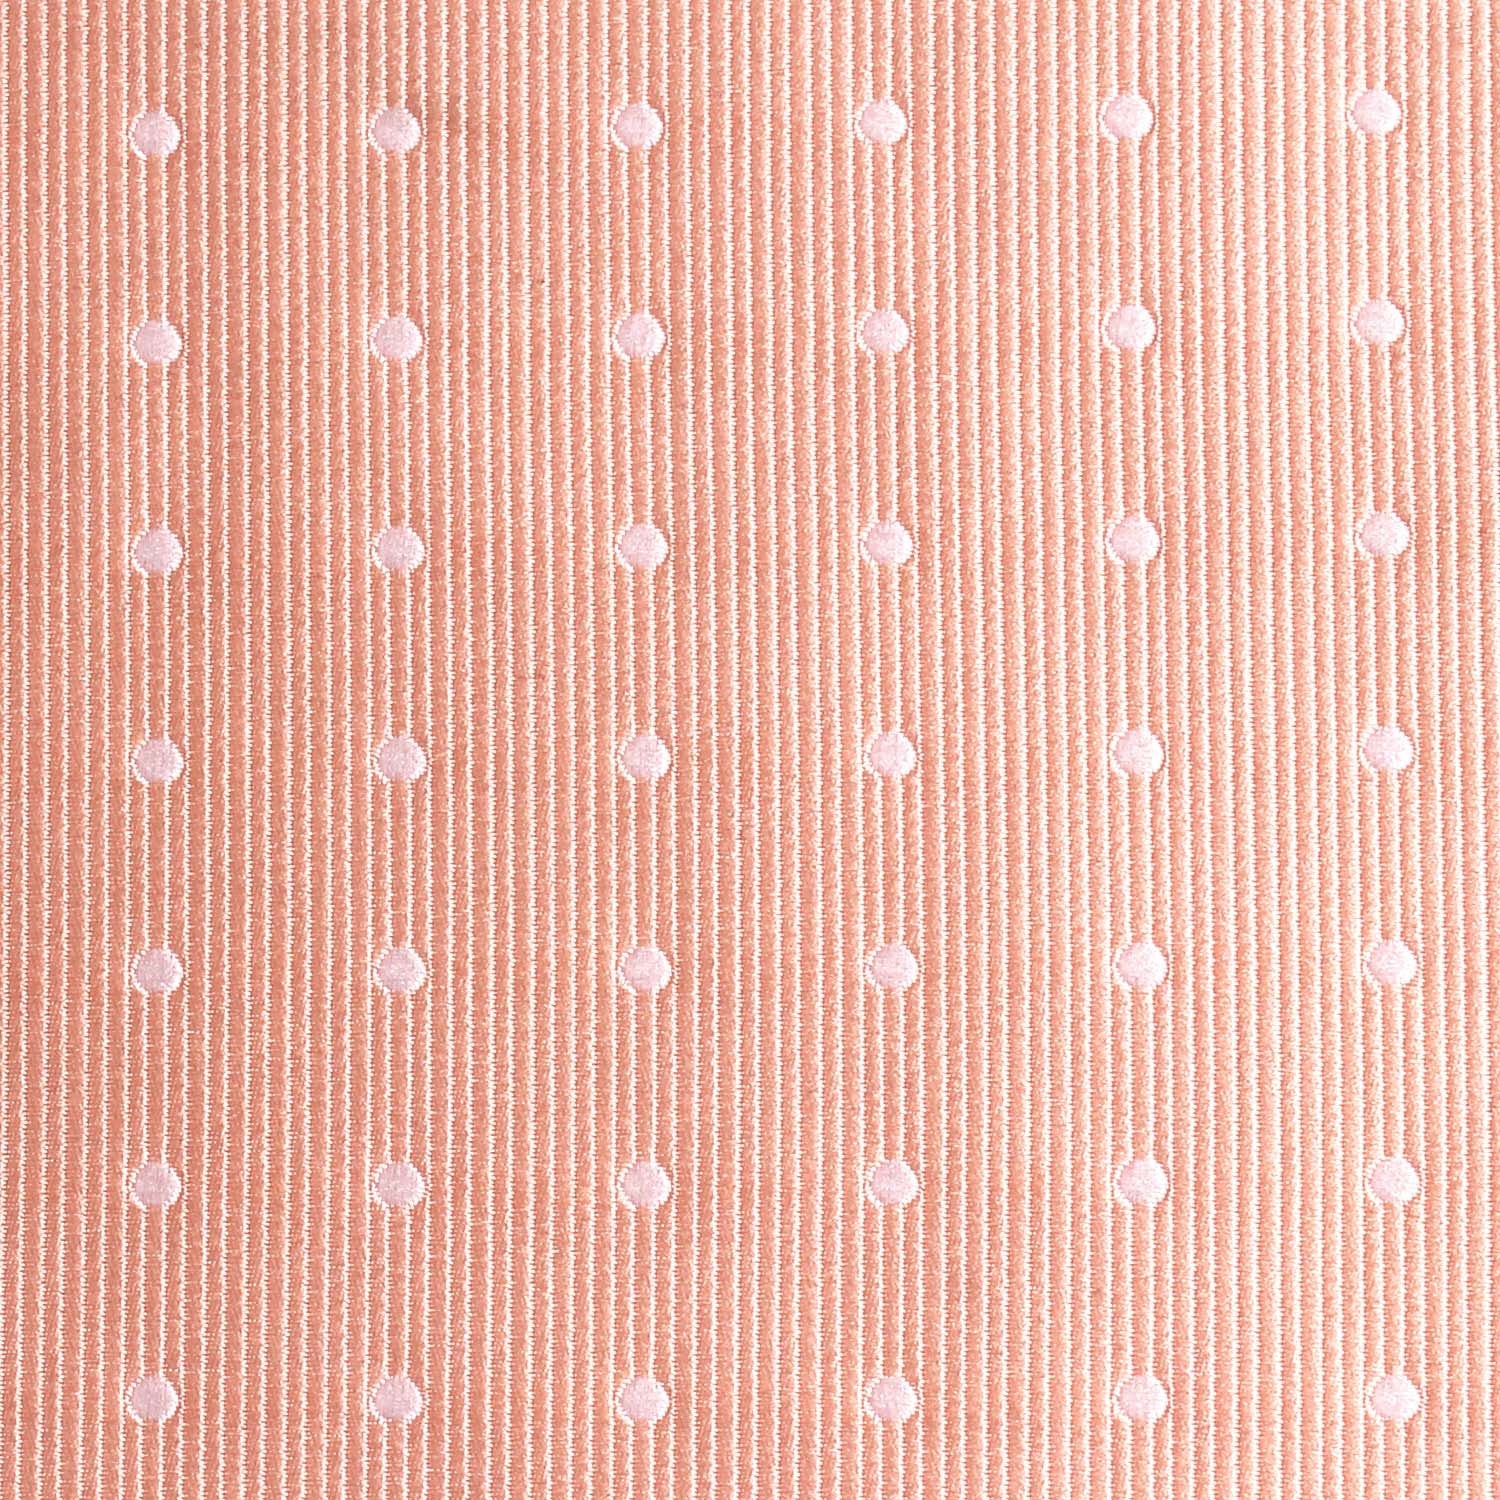 Peach with White Polka Dots Fabric Bow Tie M134